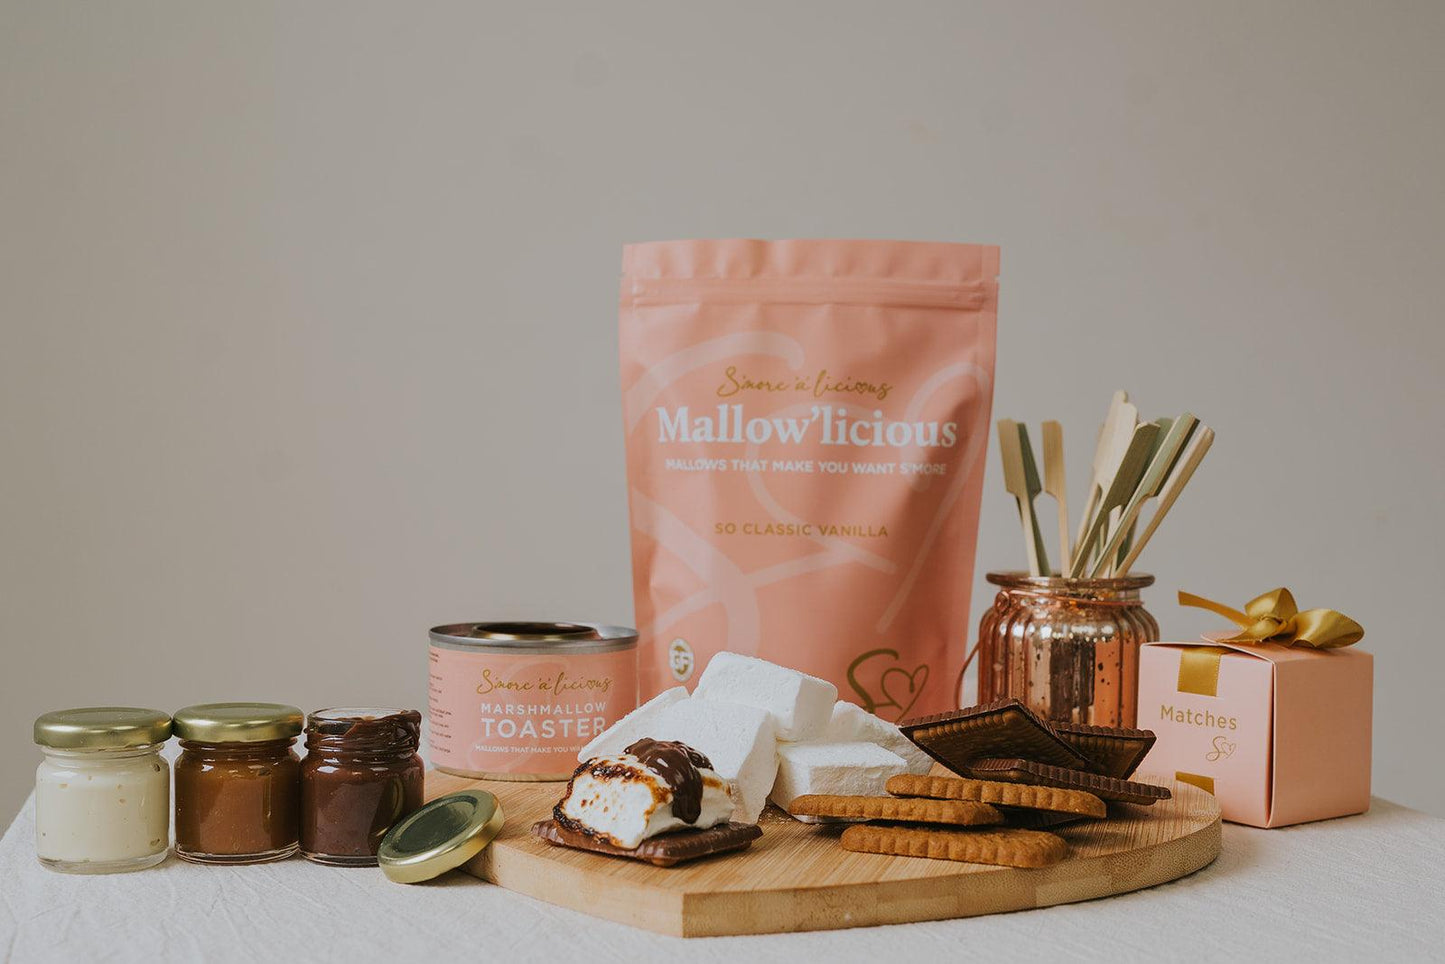 Ultimate Luxurious S'mores Kit - S’more’a’licious -<code> smorealicious.com </code>Handmade gifts and treats made in Northern Ireland